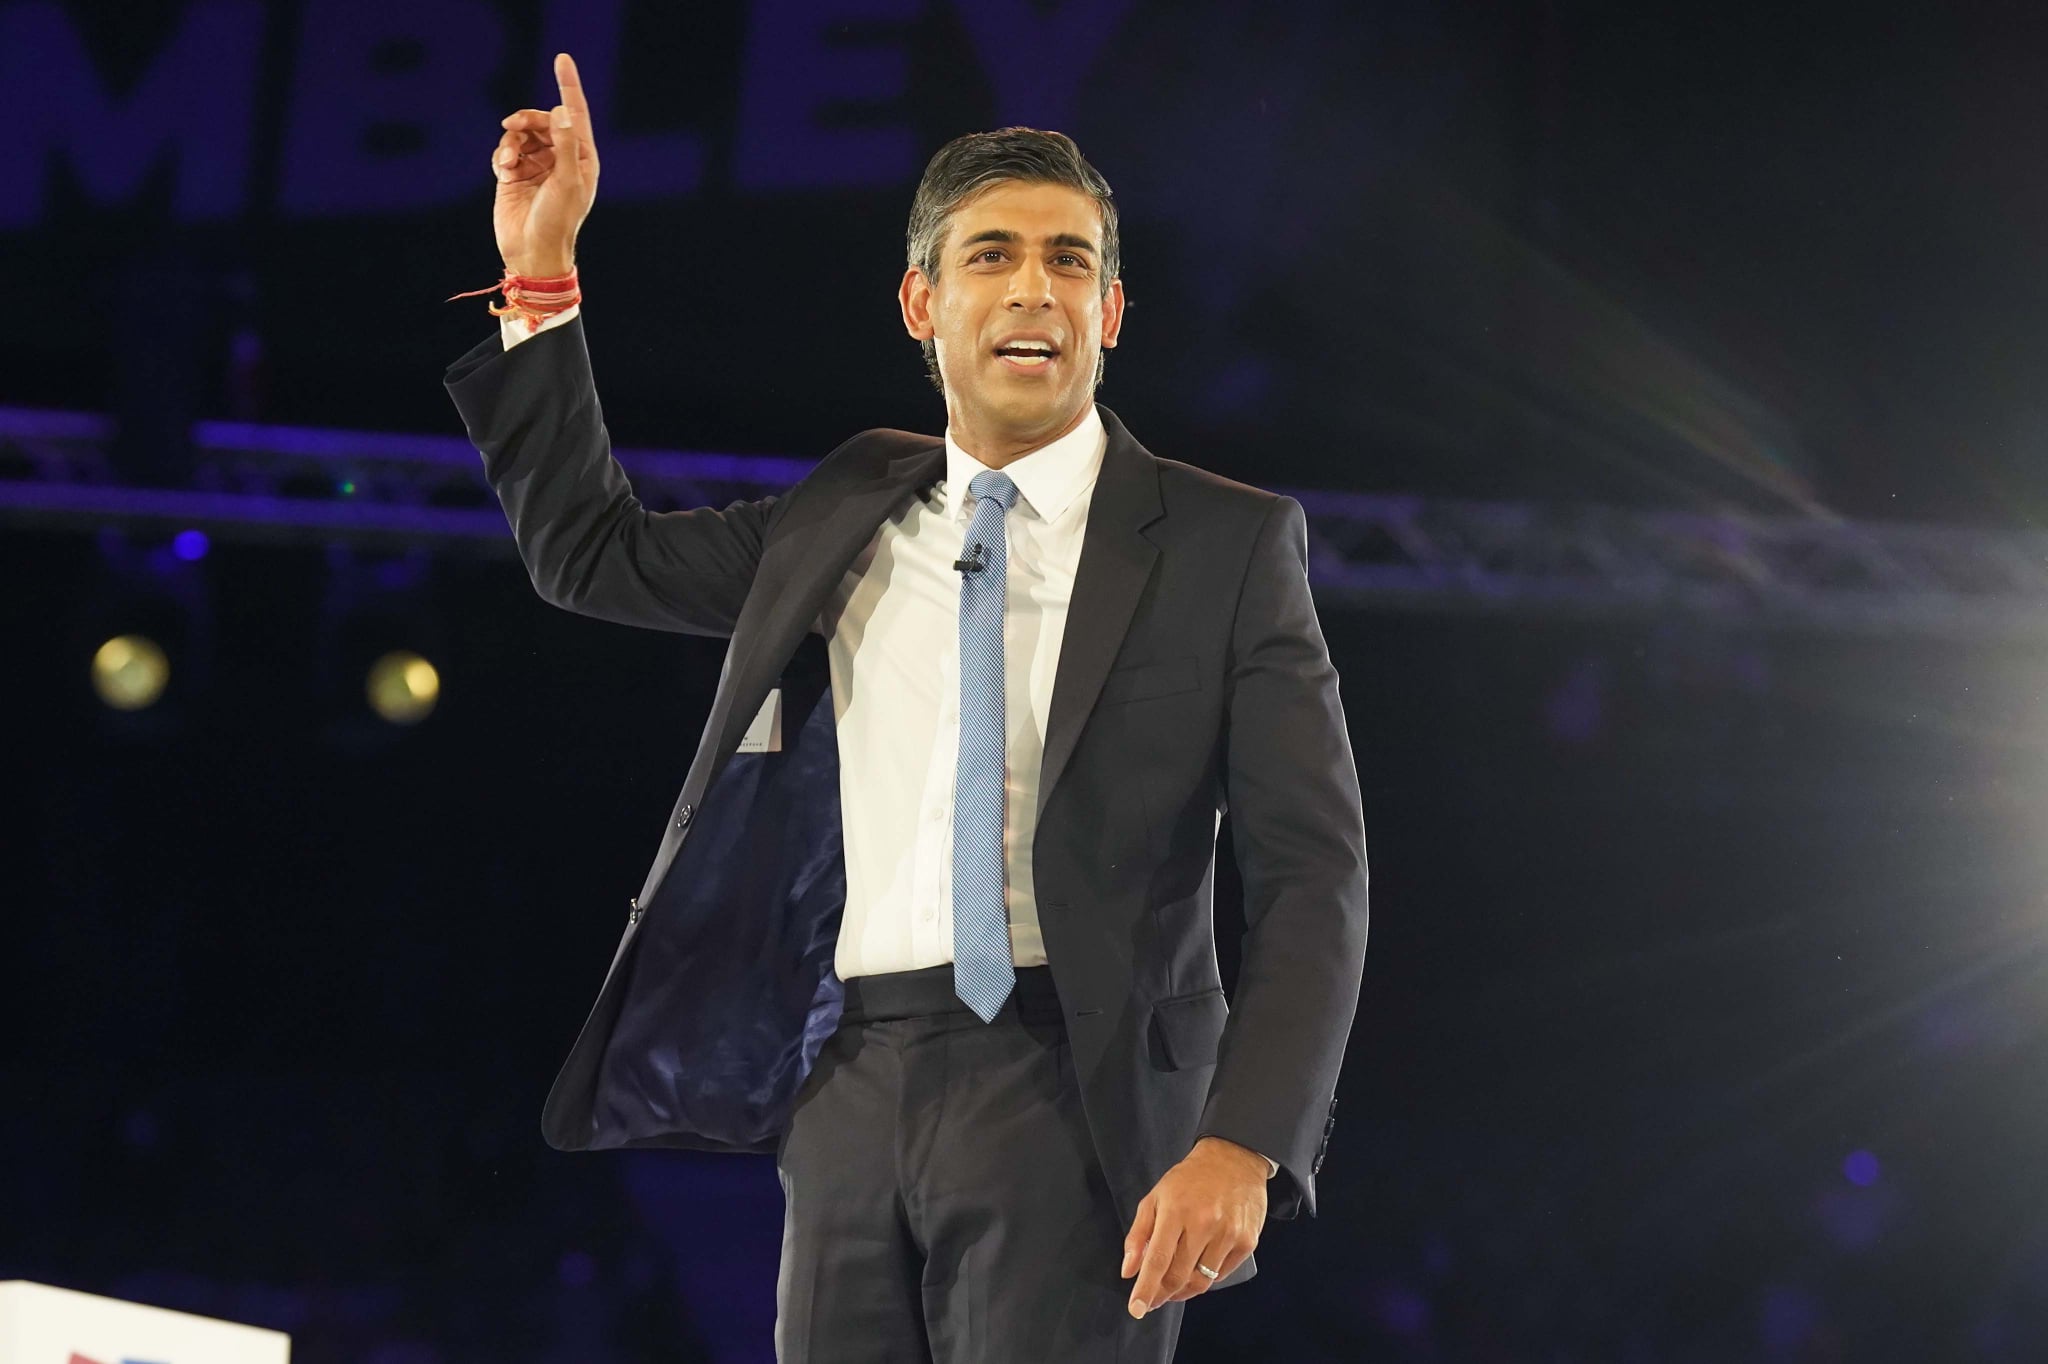 Rishi Sunak during a hustings event at Wembley Arena, London, as part of the campaign to be leader of the Conservative Party and the next prime minister. Picture date: Wednesday August 31, 2022. (Photo by Stefan Rousseau/PA Images via Getty Images)